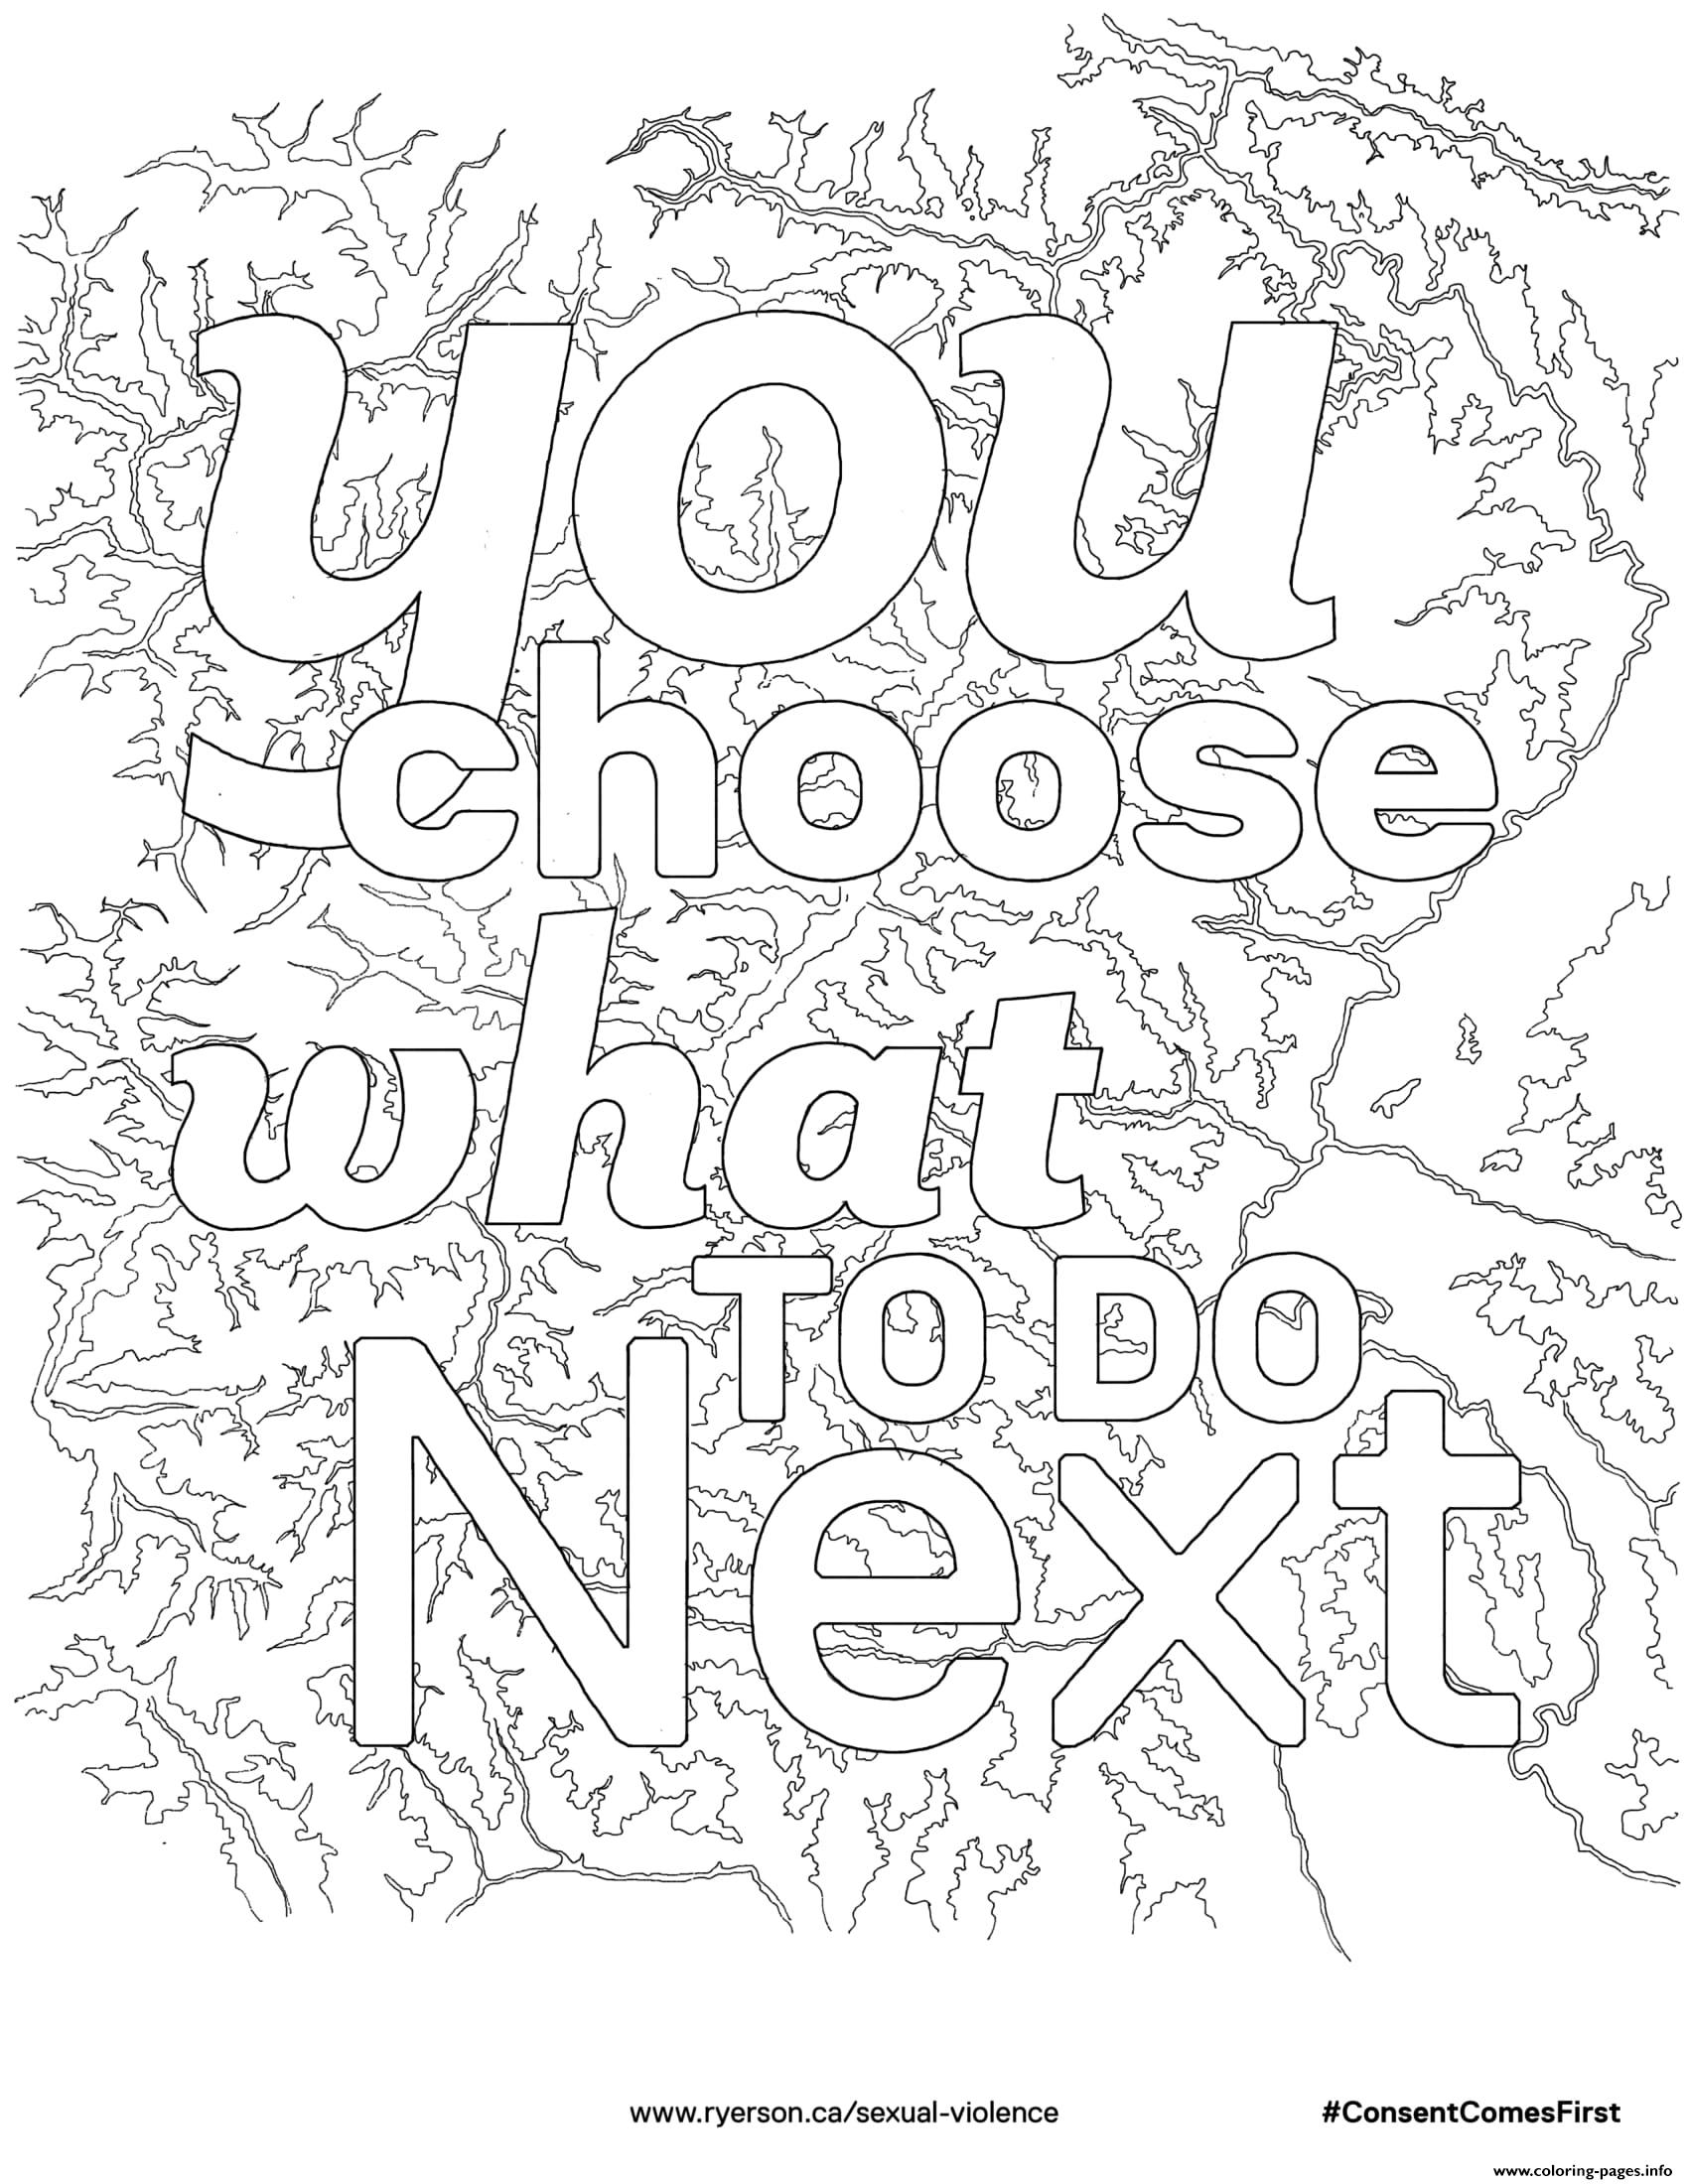 You Choose What To Do Next coloring